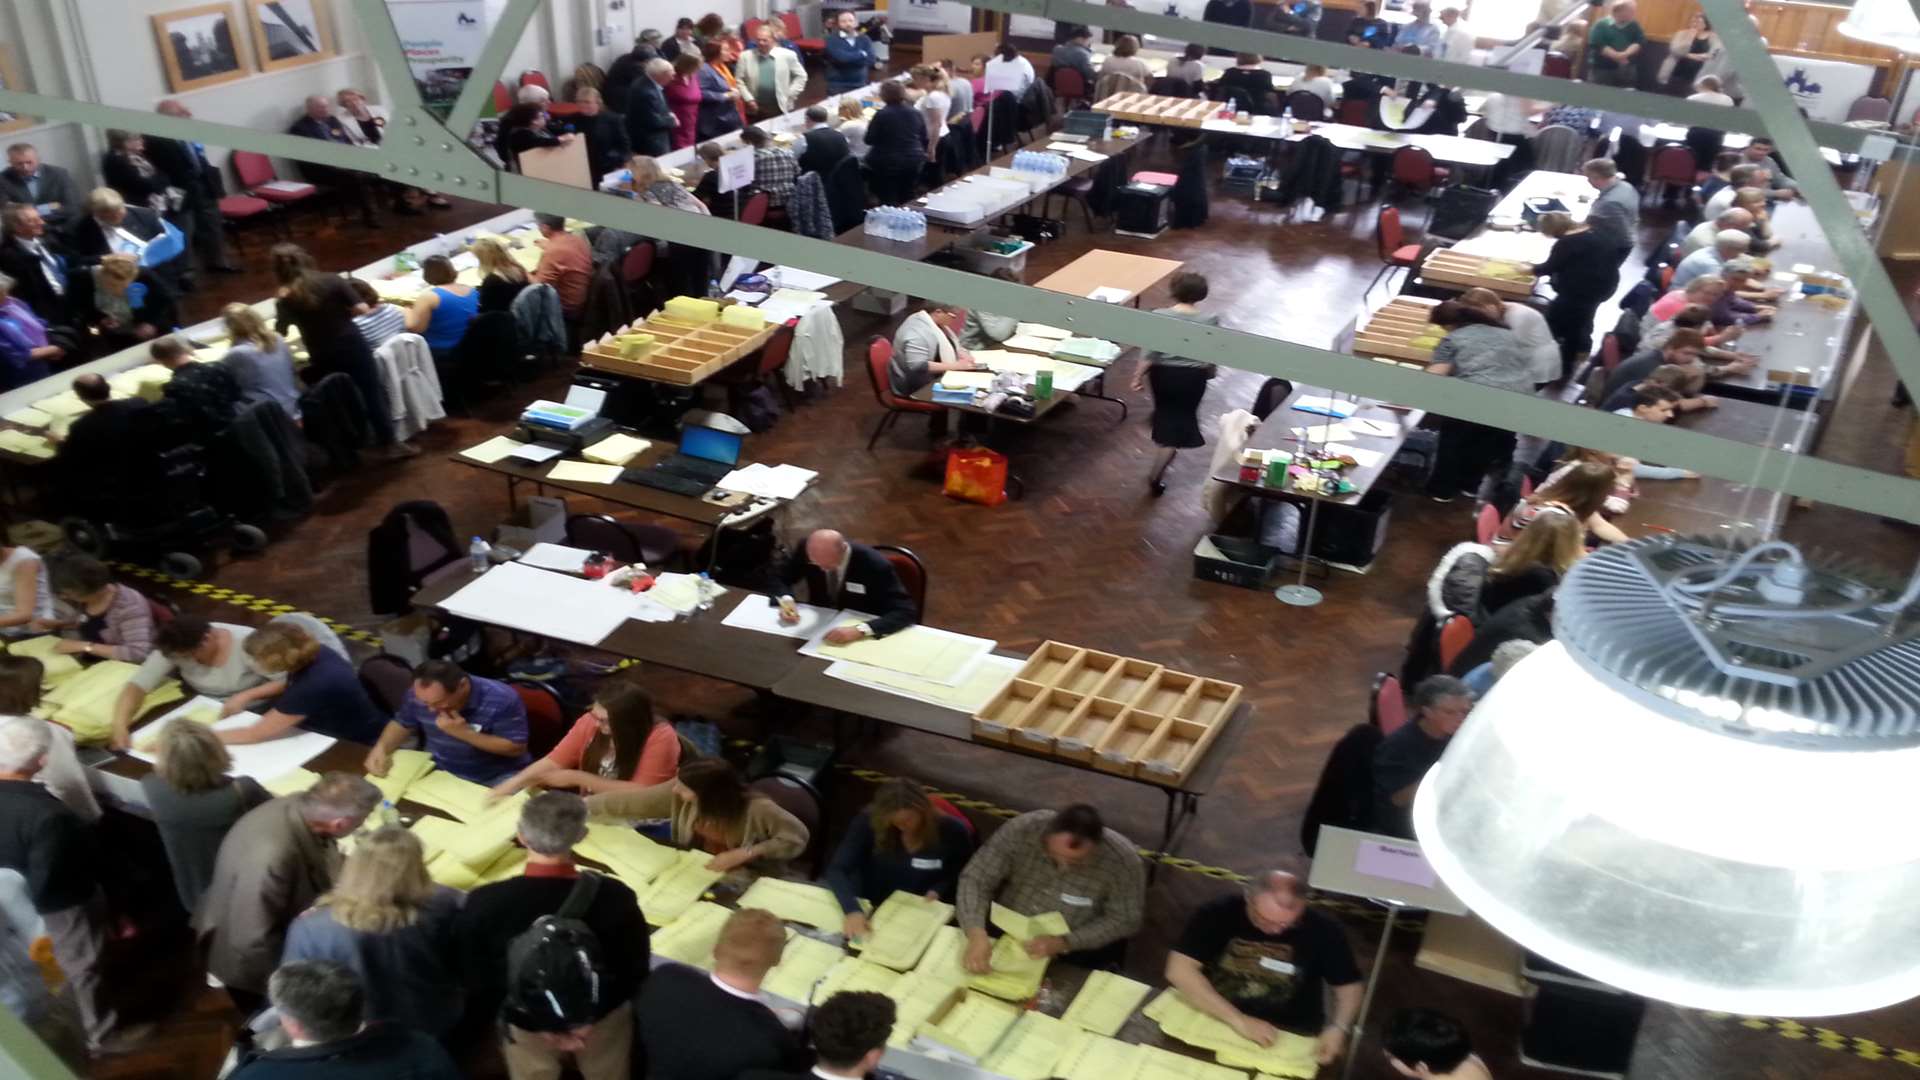 The city council election count at the Westgate Hall